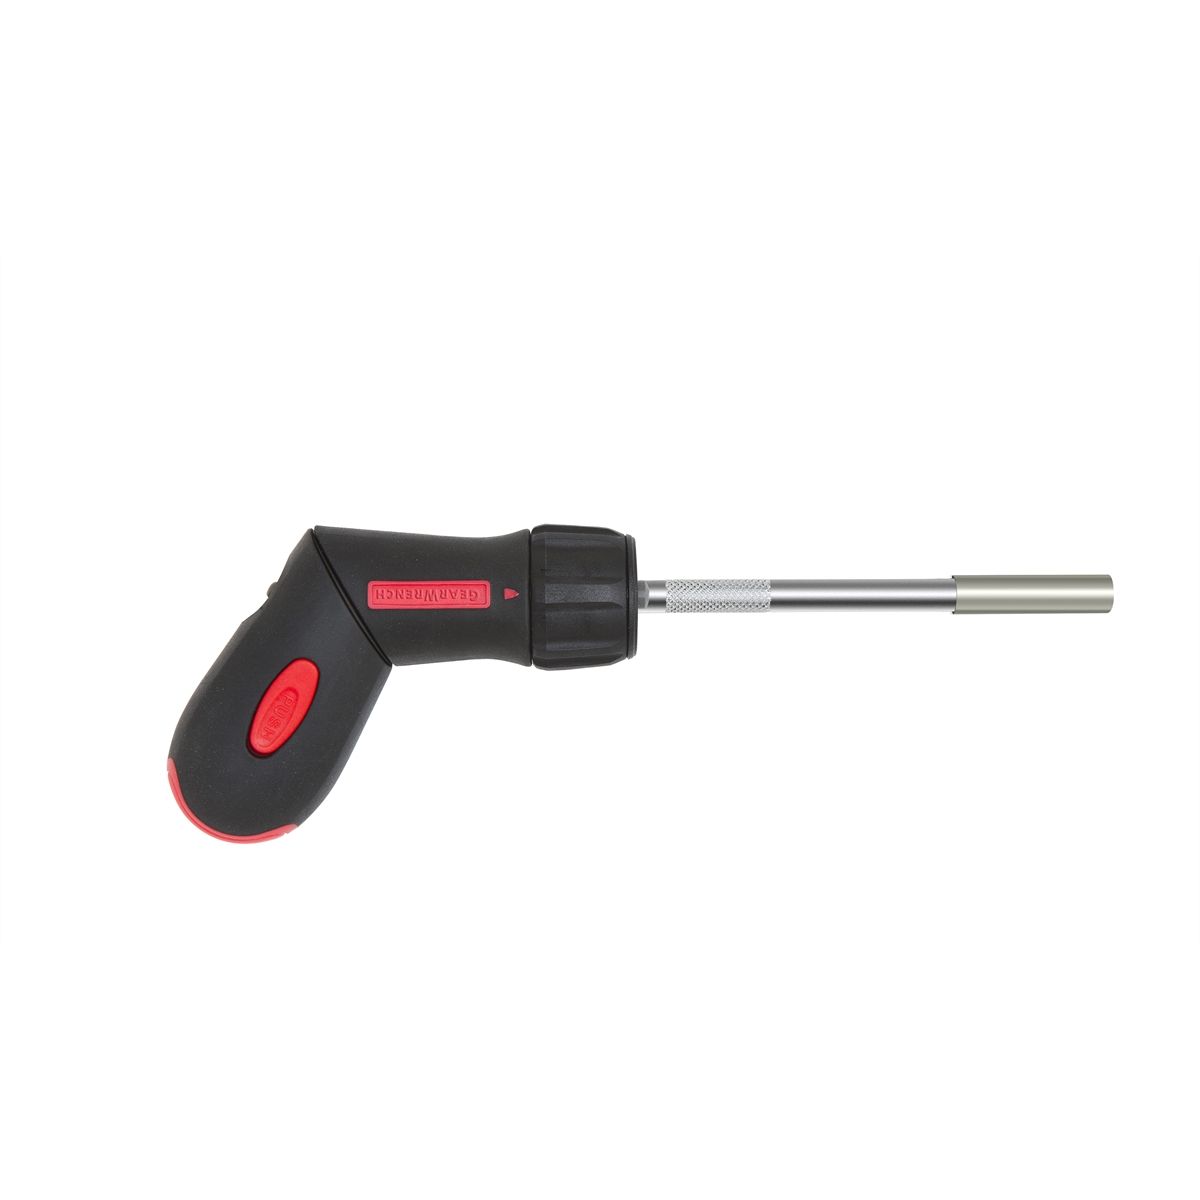 2 Position Ratcheting Screwdriver with LED Lights